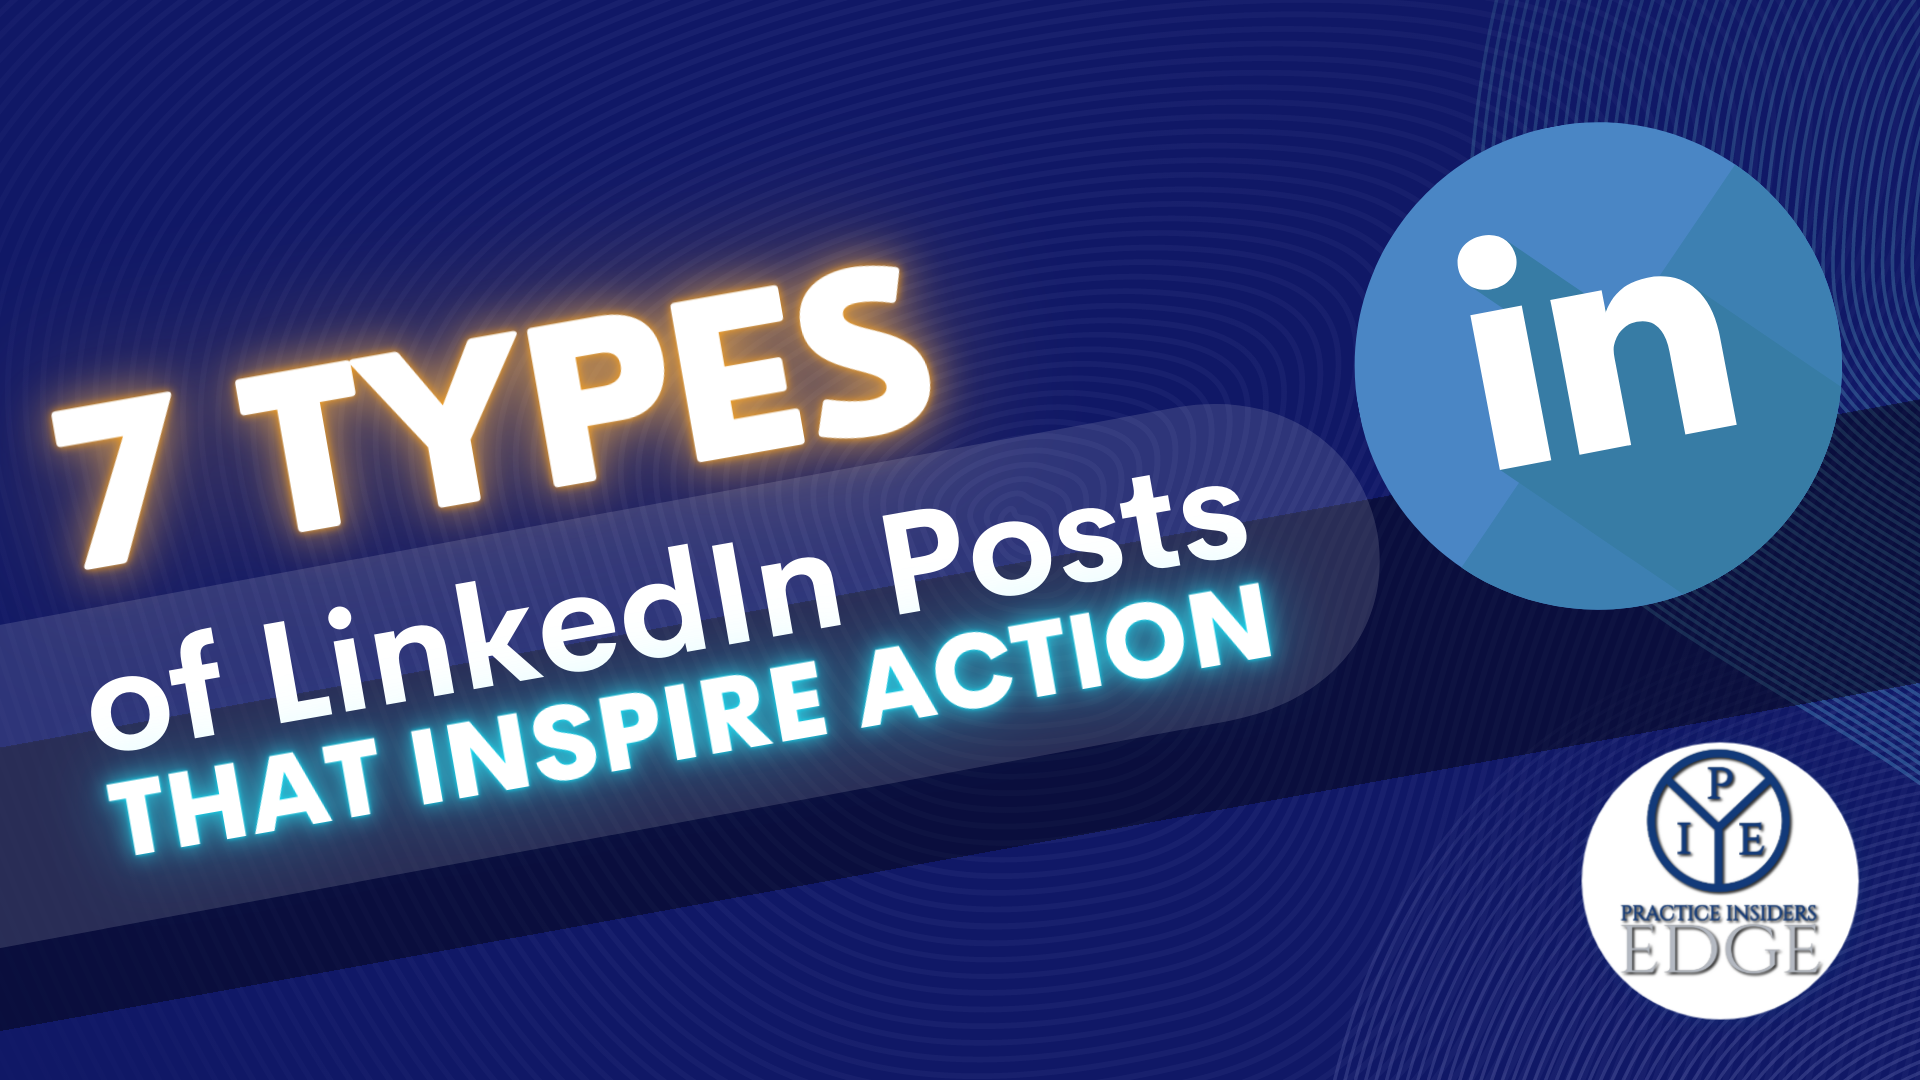 7 Types of LinkedIn Posts That Inspire Action